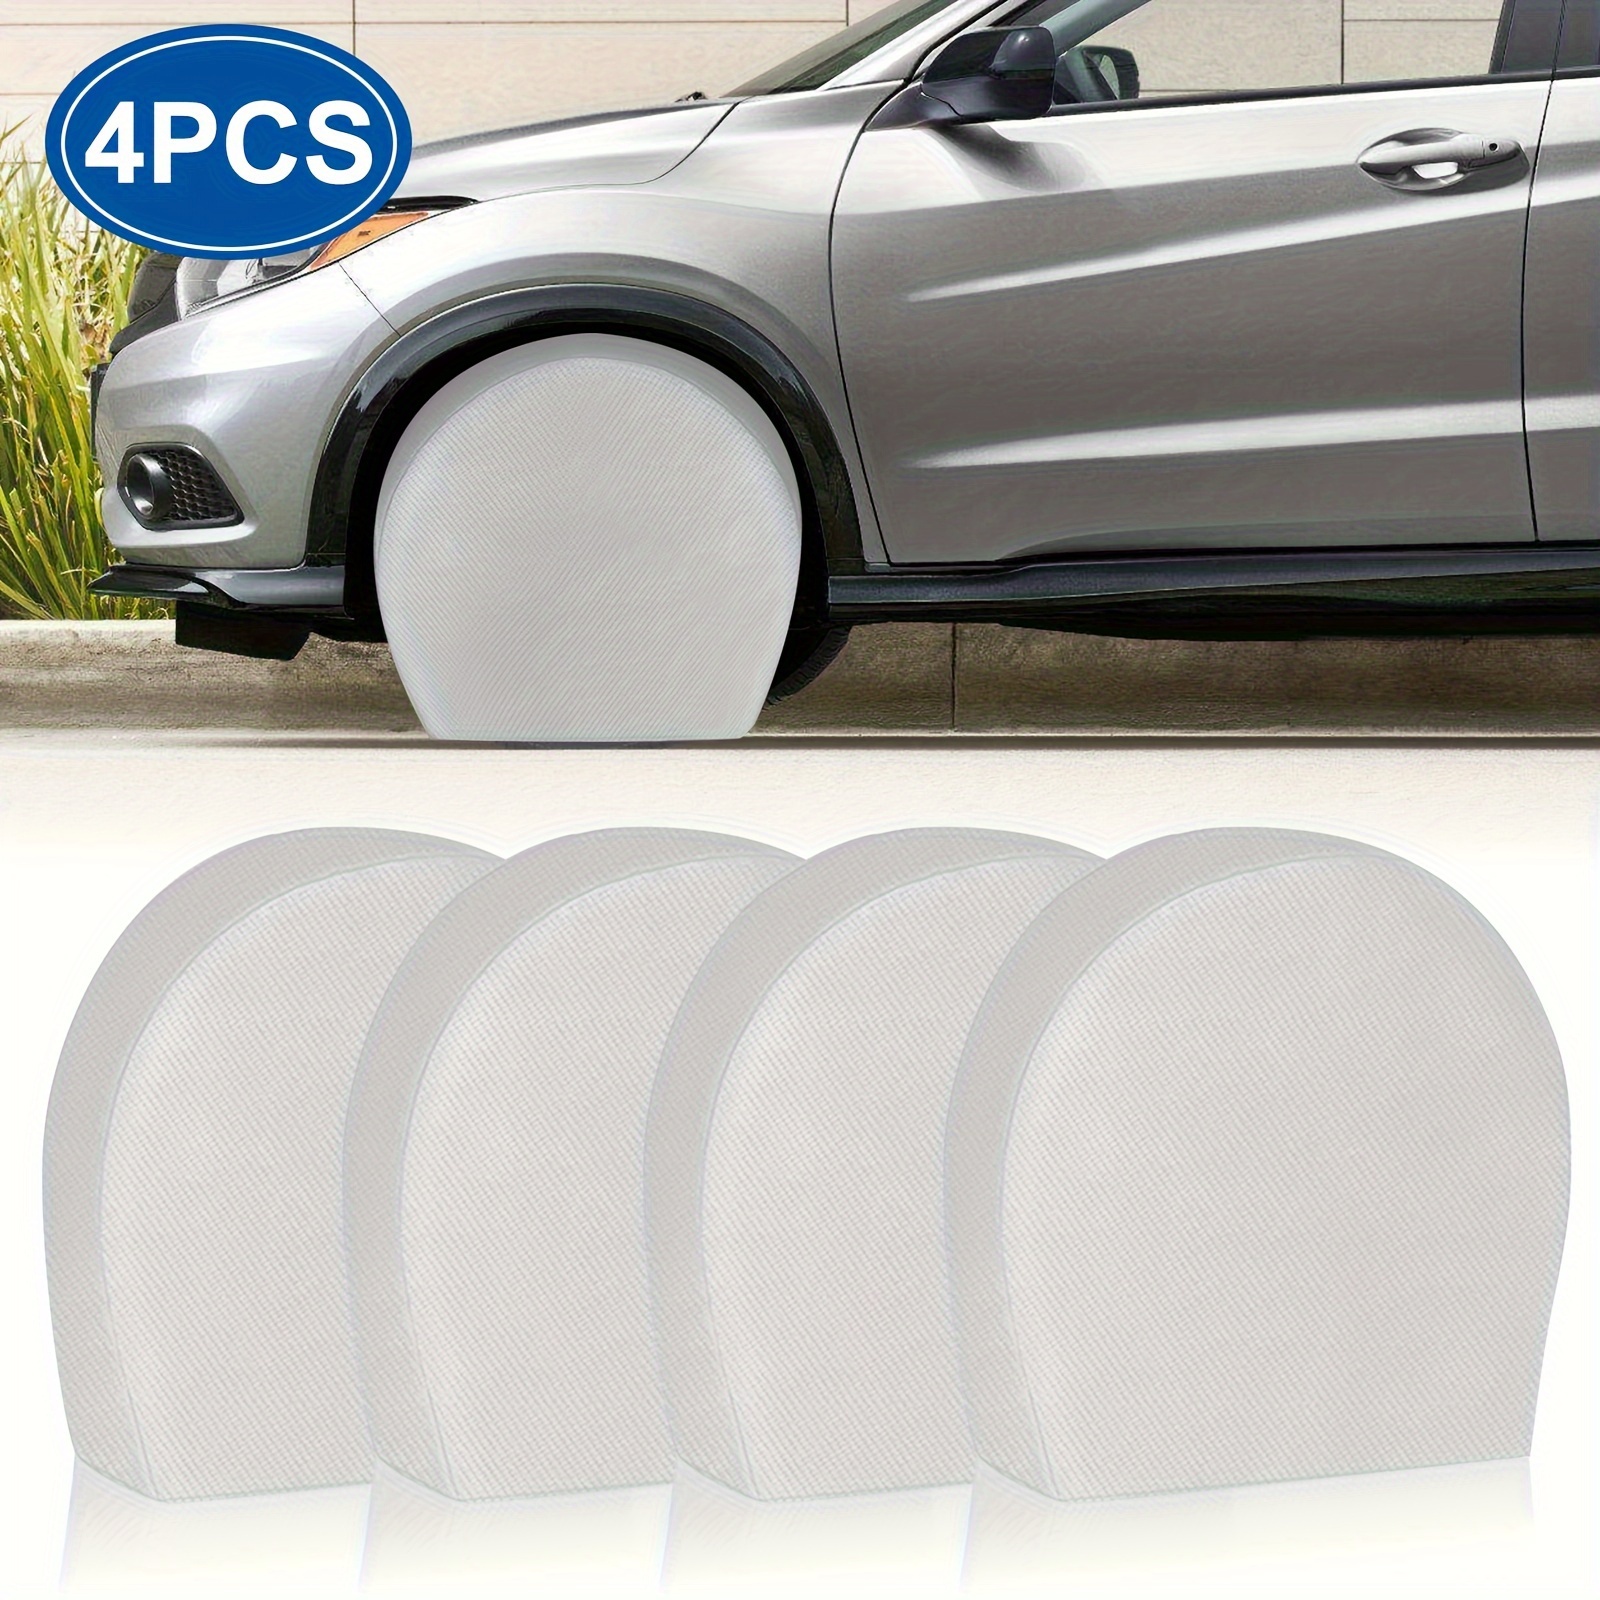 

4pcs Tire Covers, Wheel Spare Protector Cover Set, For 27"- 29" Trucks Trailers Campers Suv Cars Accessories